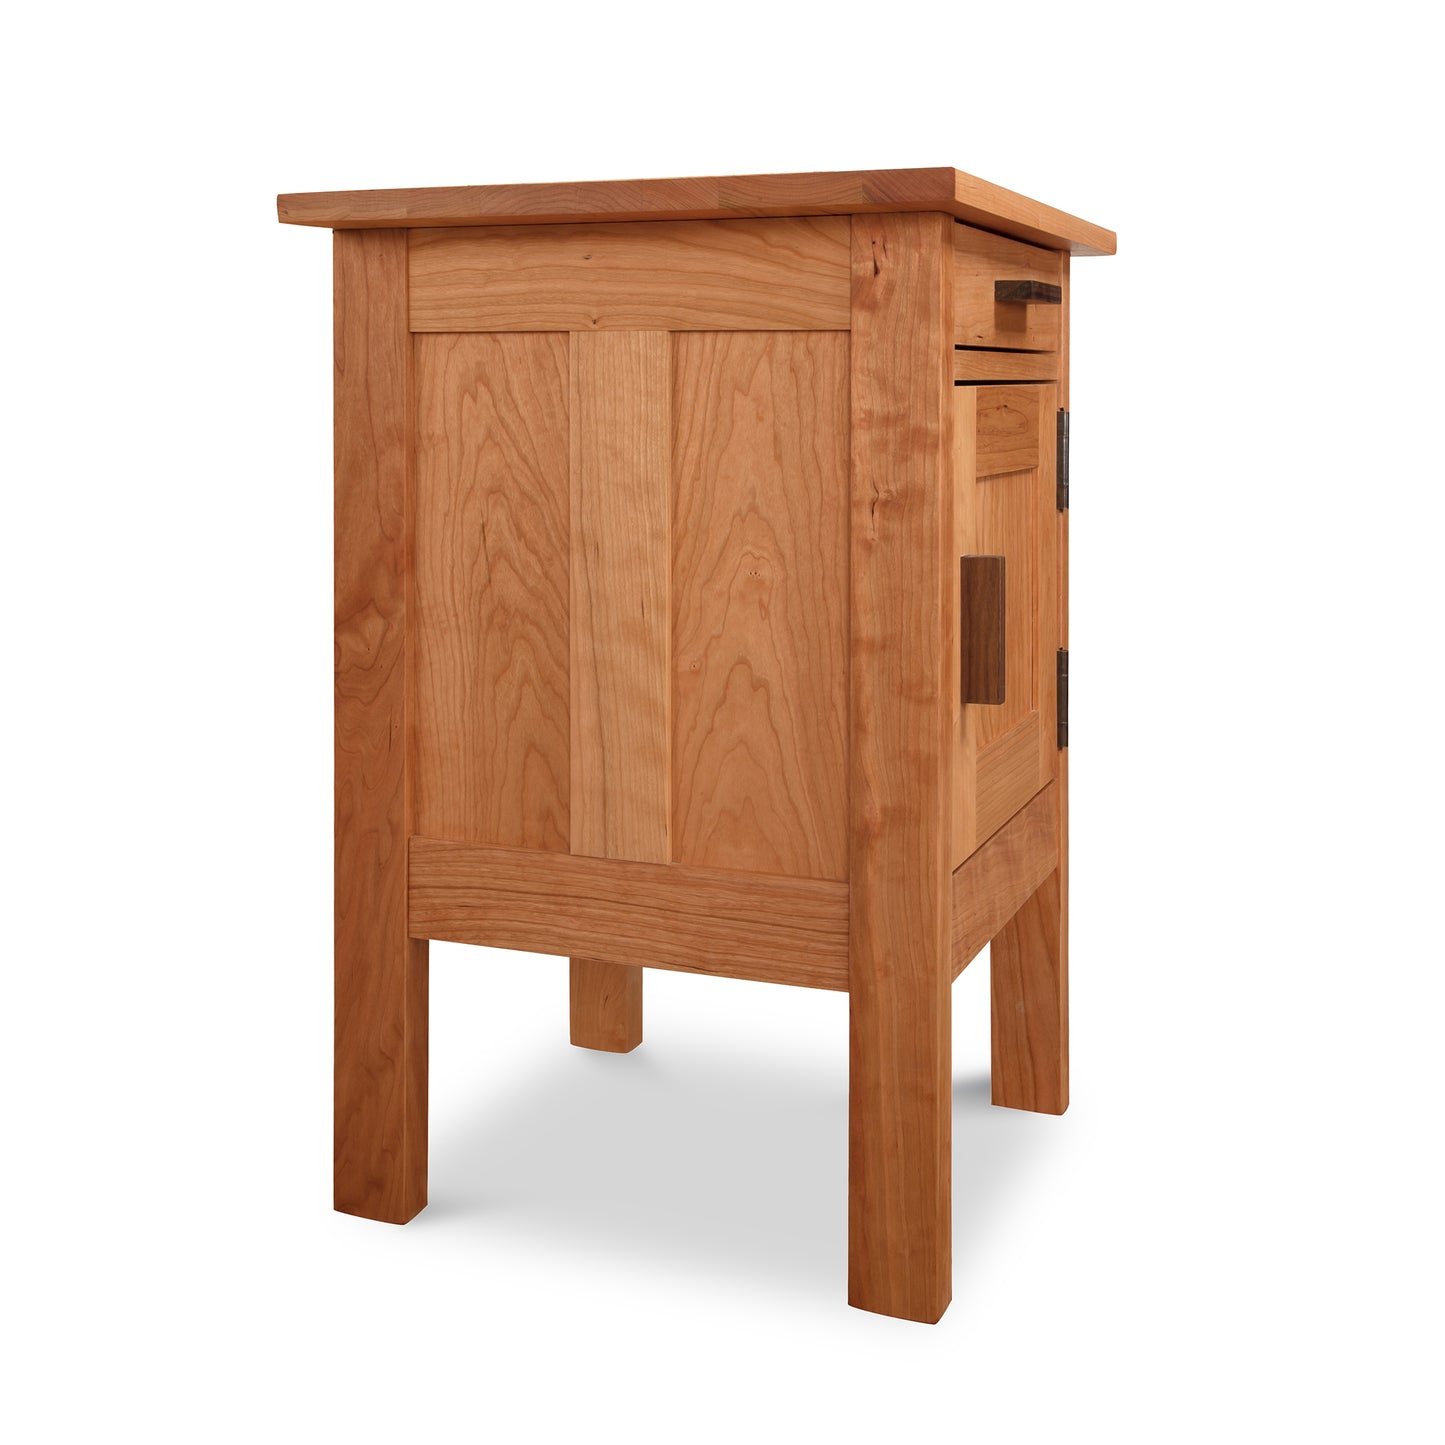 A small Vermont Furniture Designs Modern Craftsman 1-Drawer Nightstand with Door, made of wood.